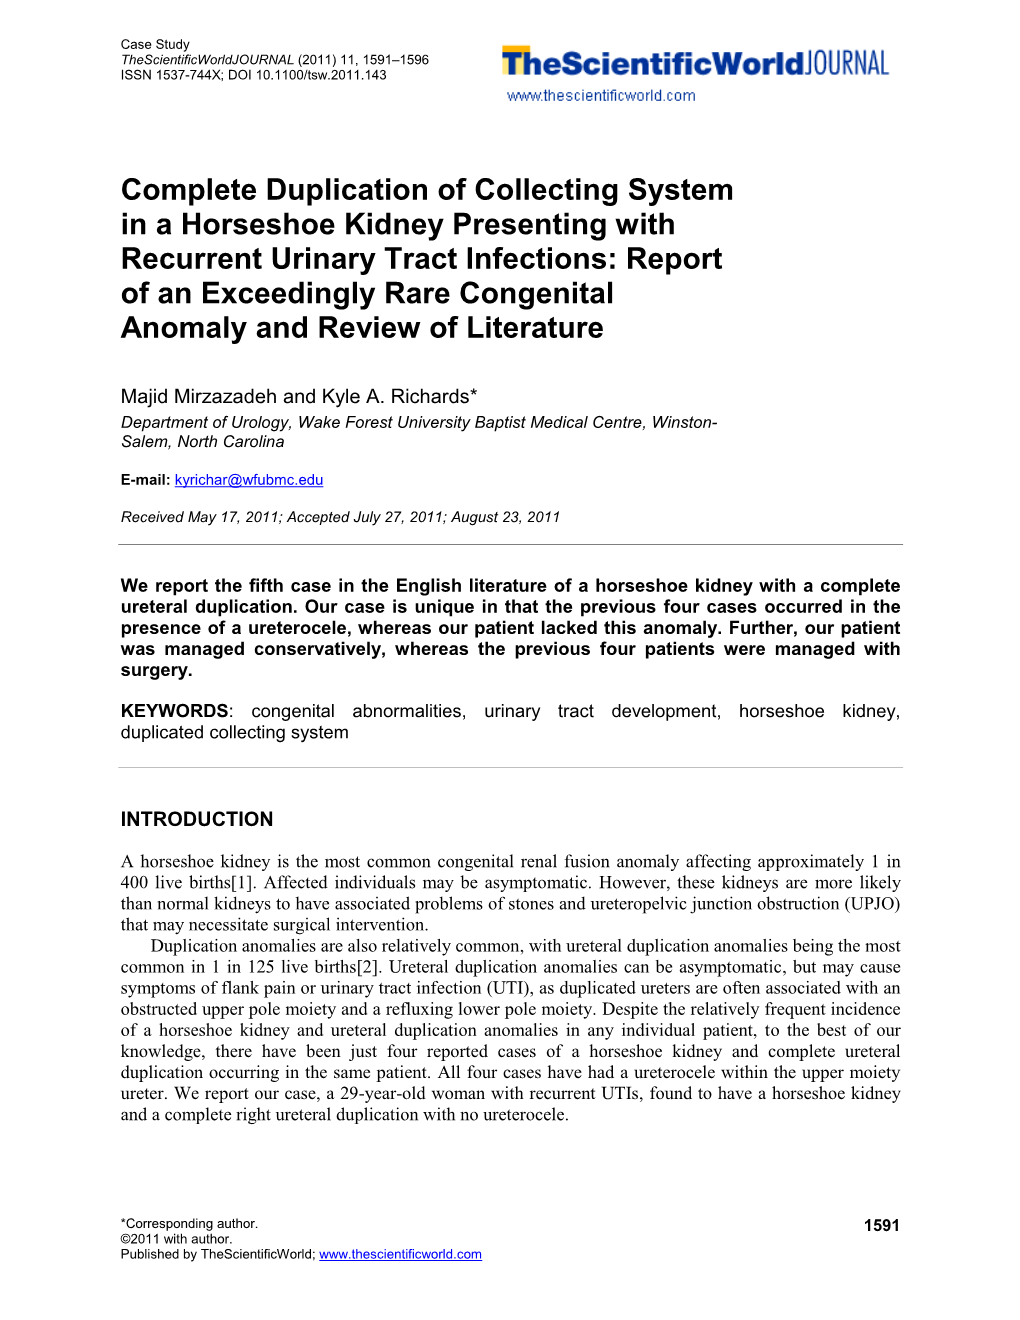 Complete Duplication of Collecting System in A